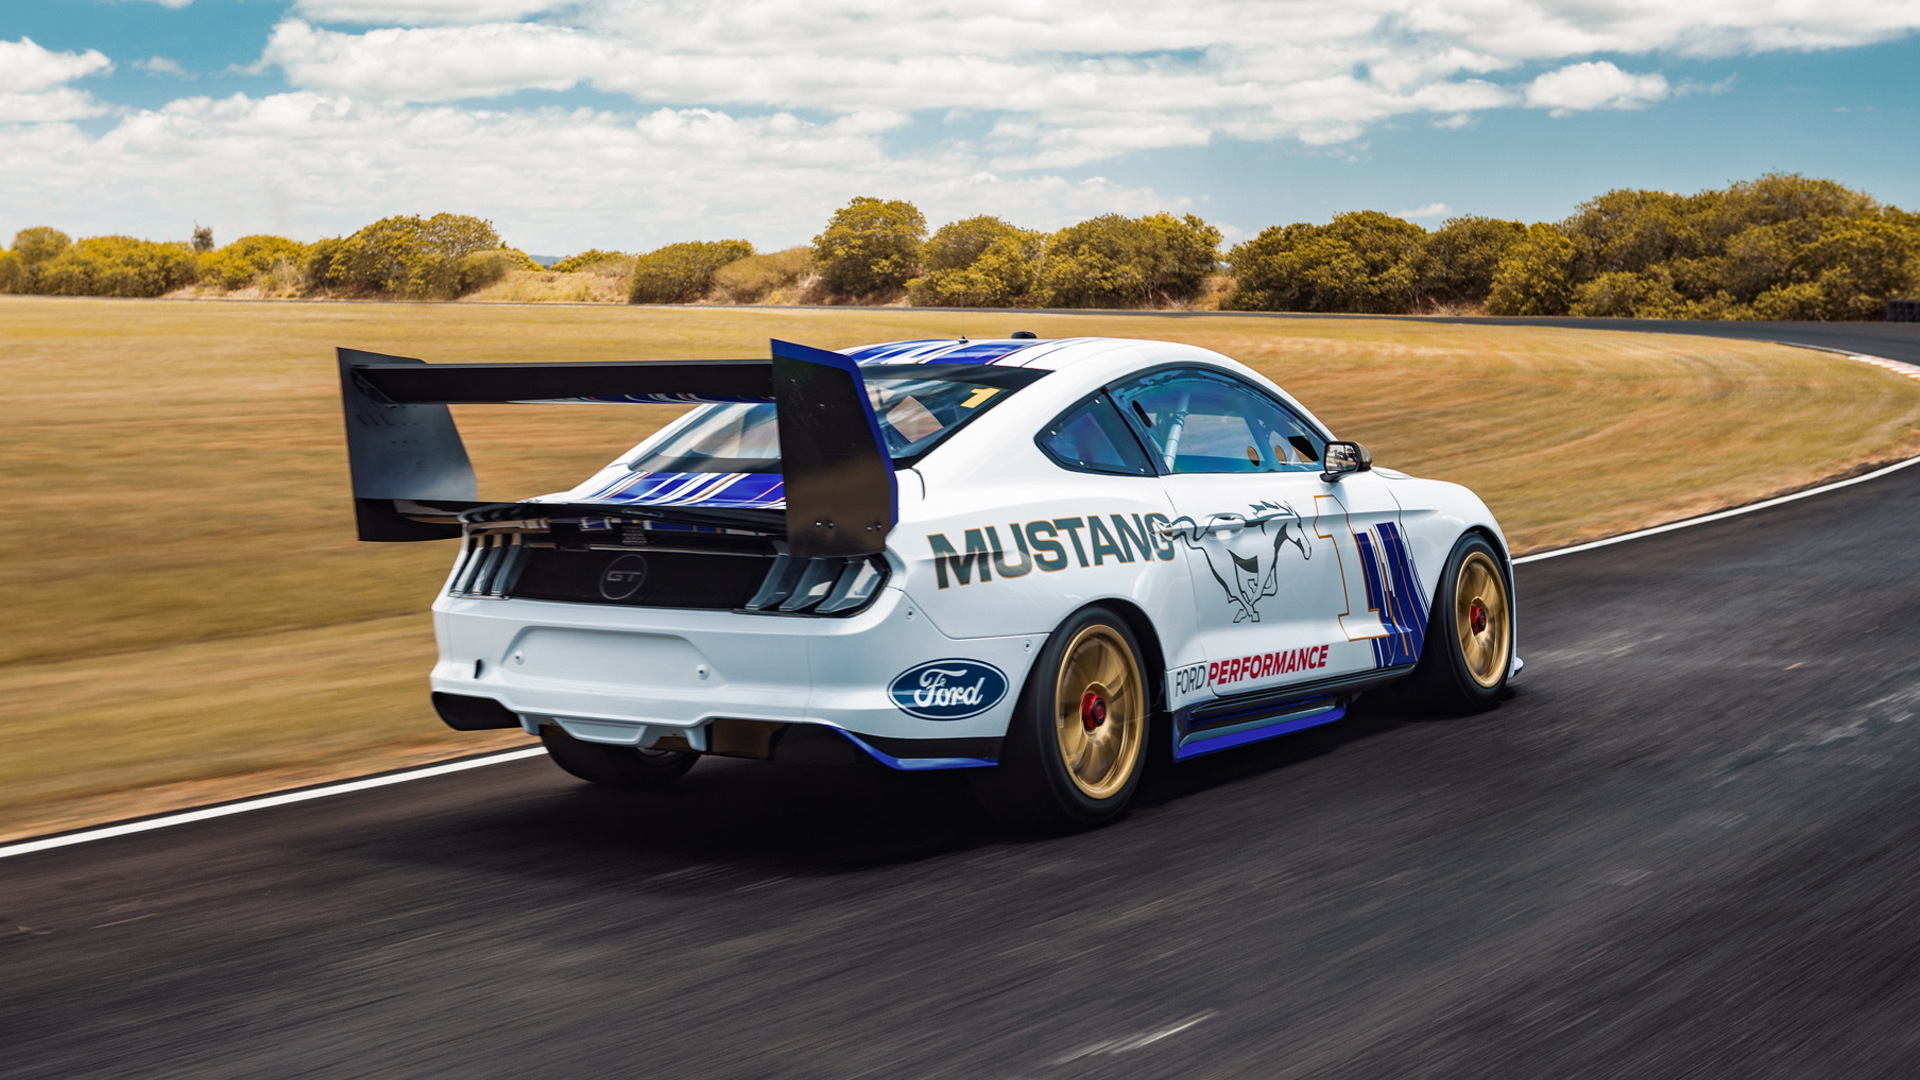 2019 Ford Mustang Australia Supercars race car